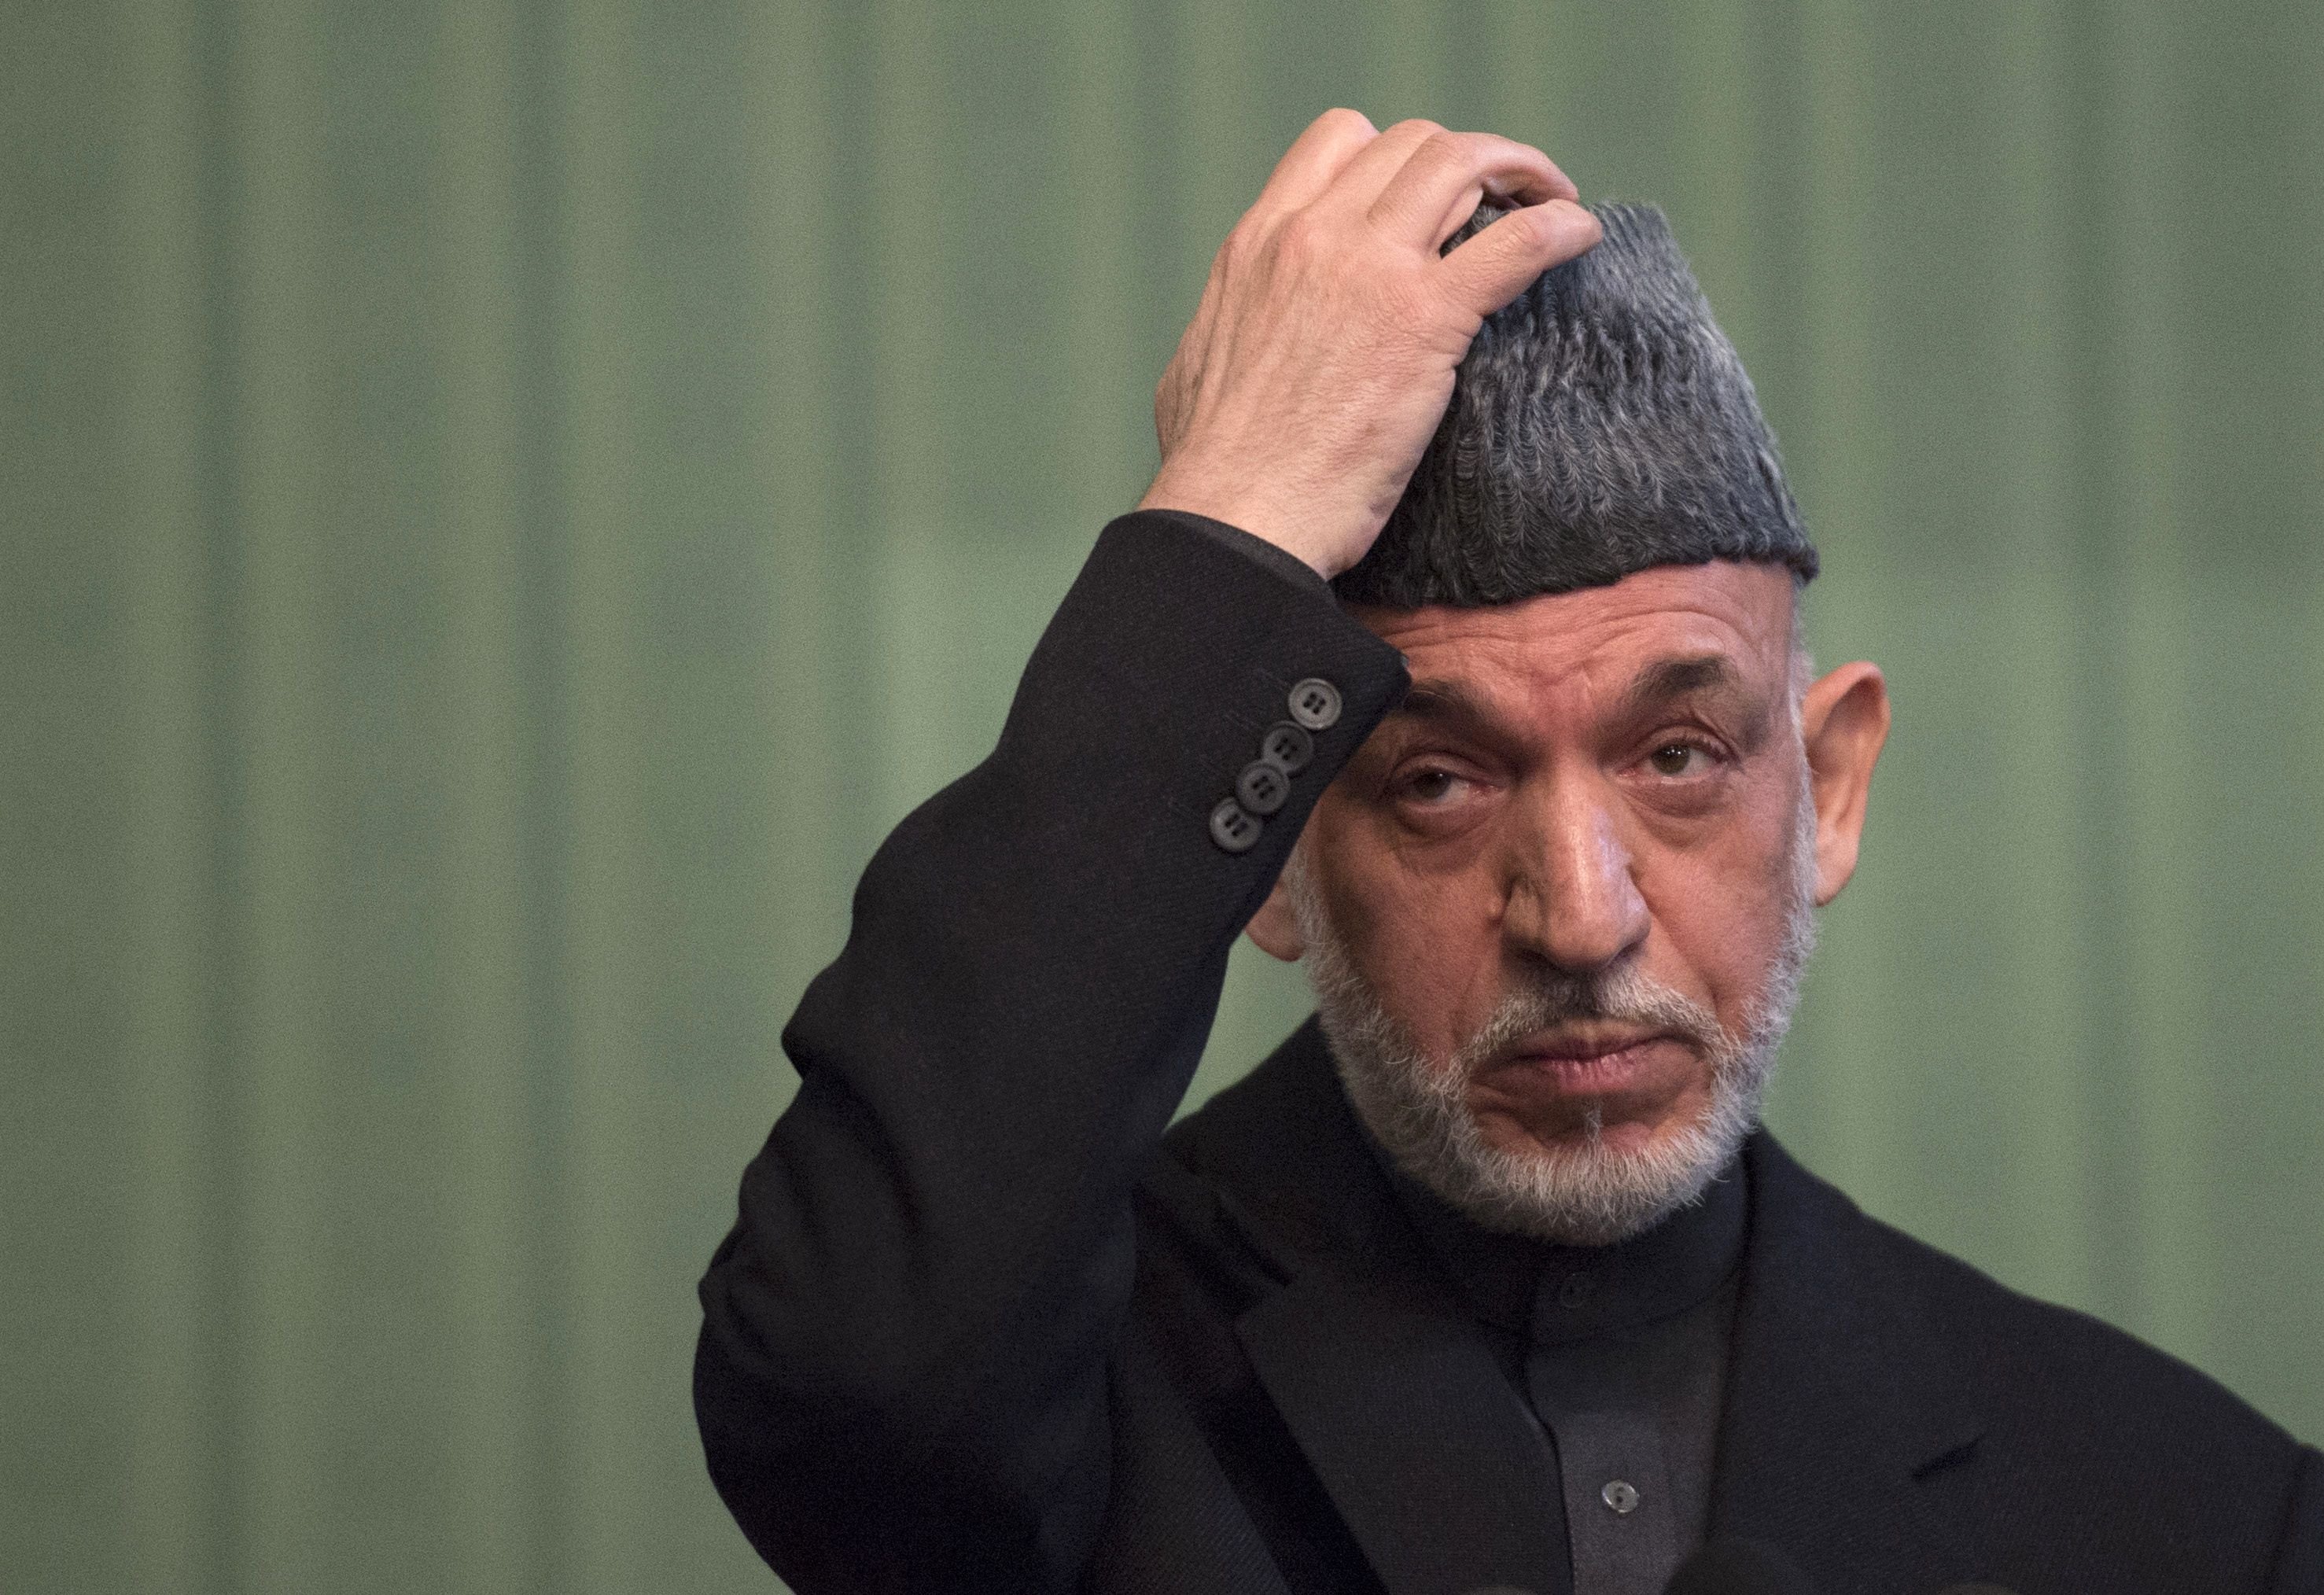 Afghan President Hamid Karzai gestures during a press conference at the Presidential Palace in Kabul on January 25, 2014. (Johannes Eisele—AFP/Getty Images)